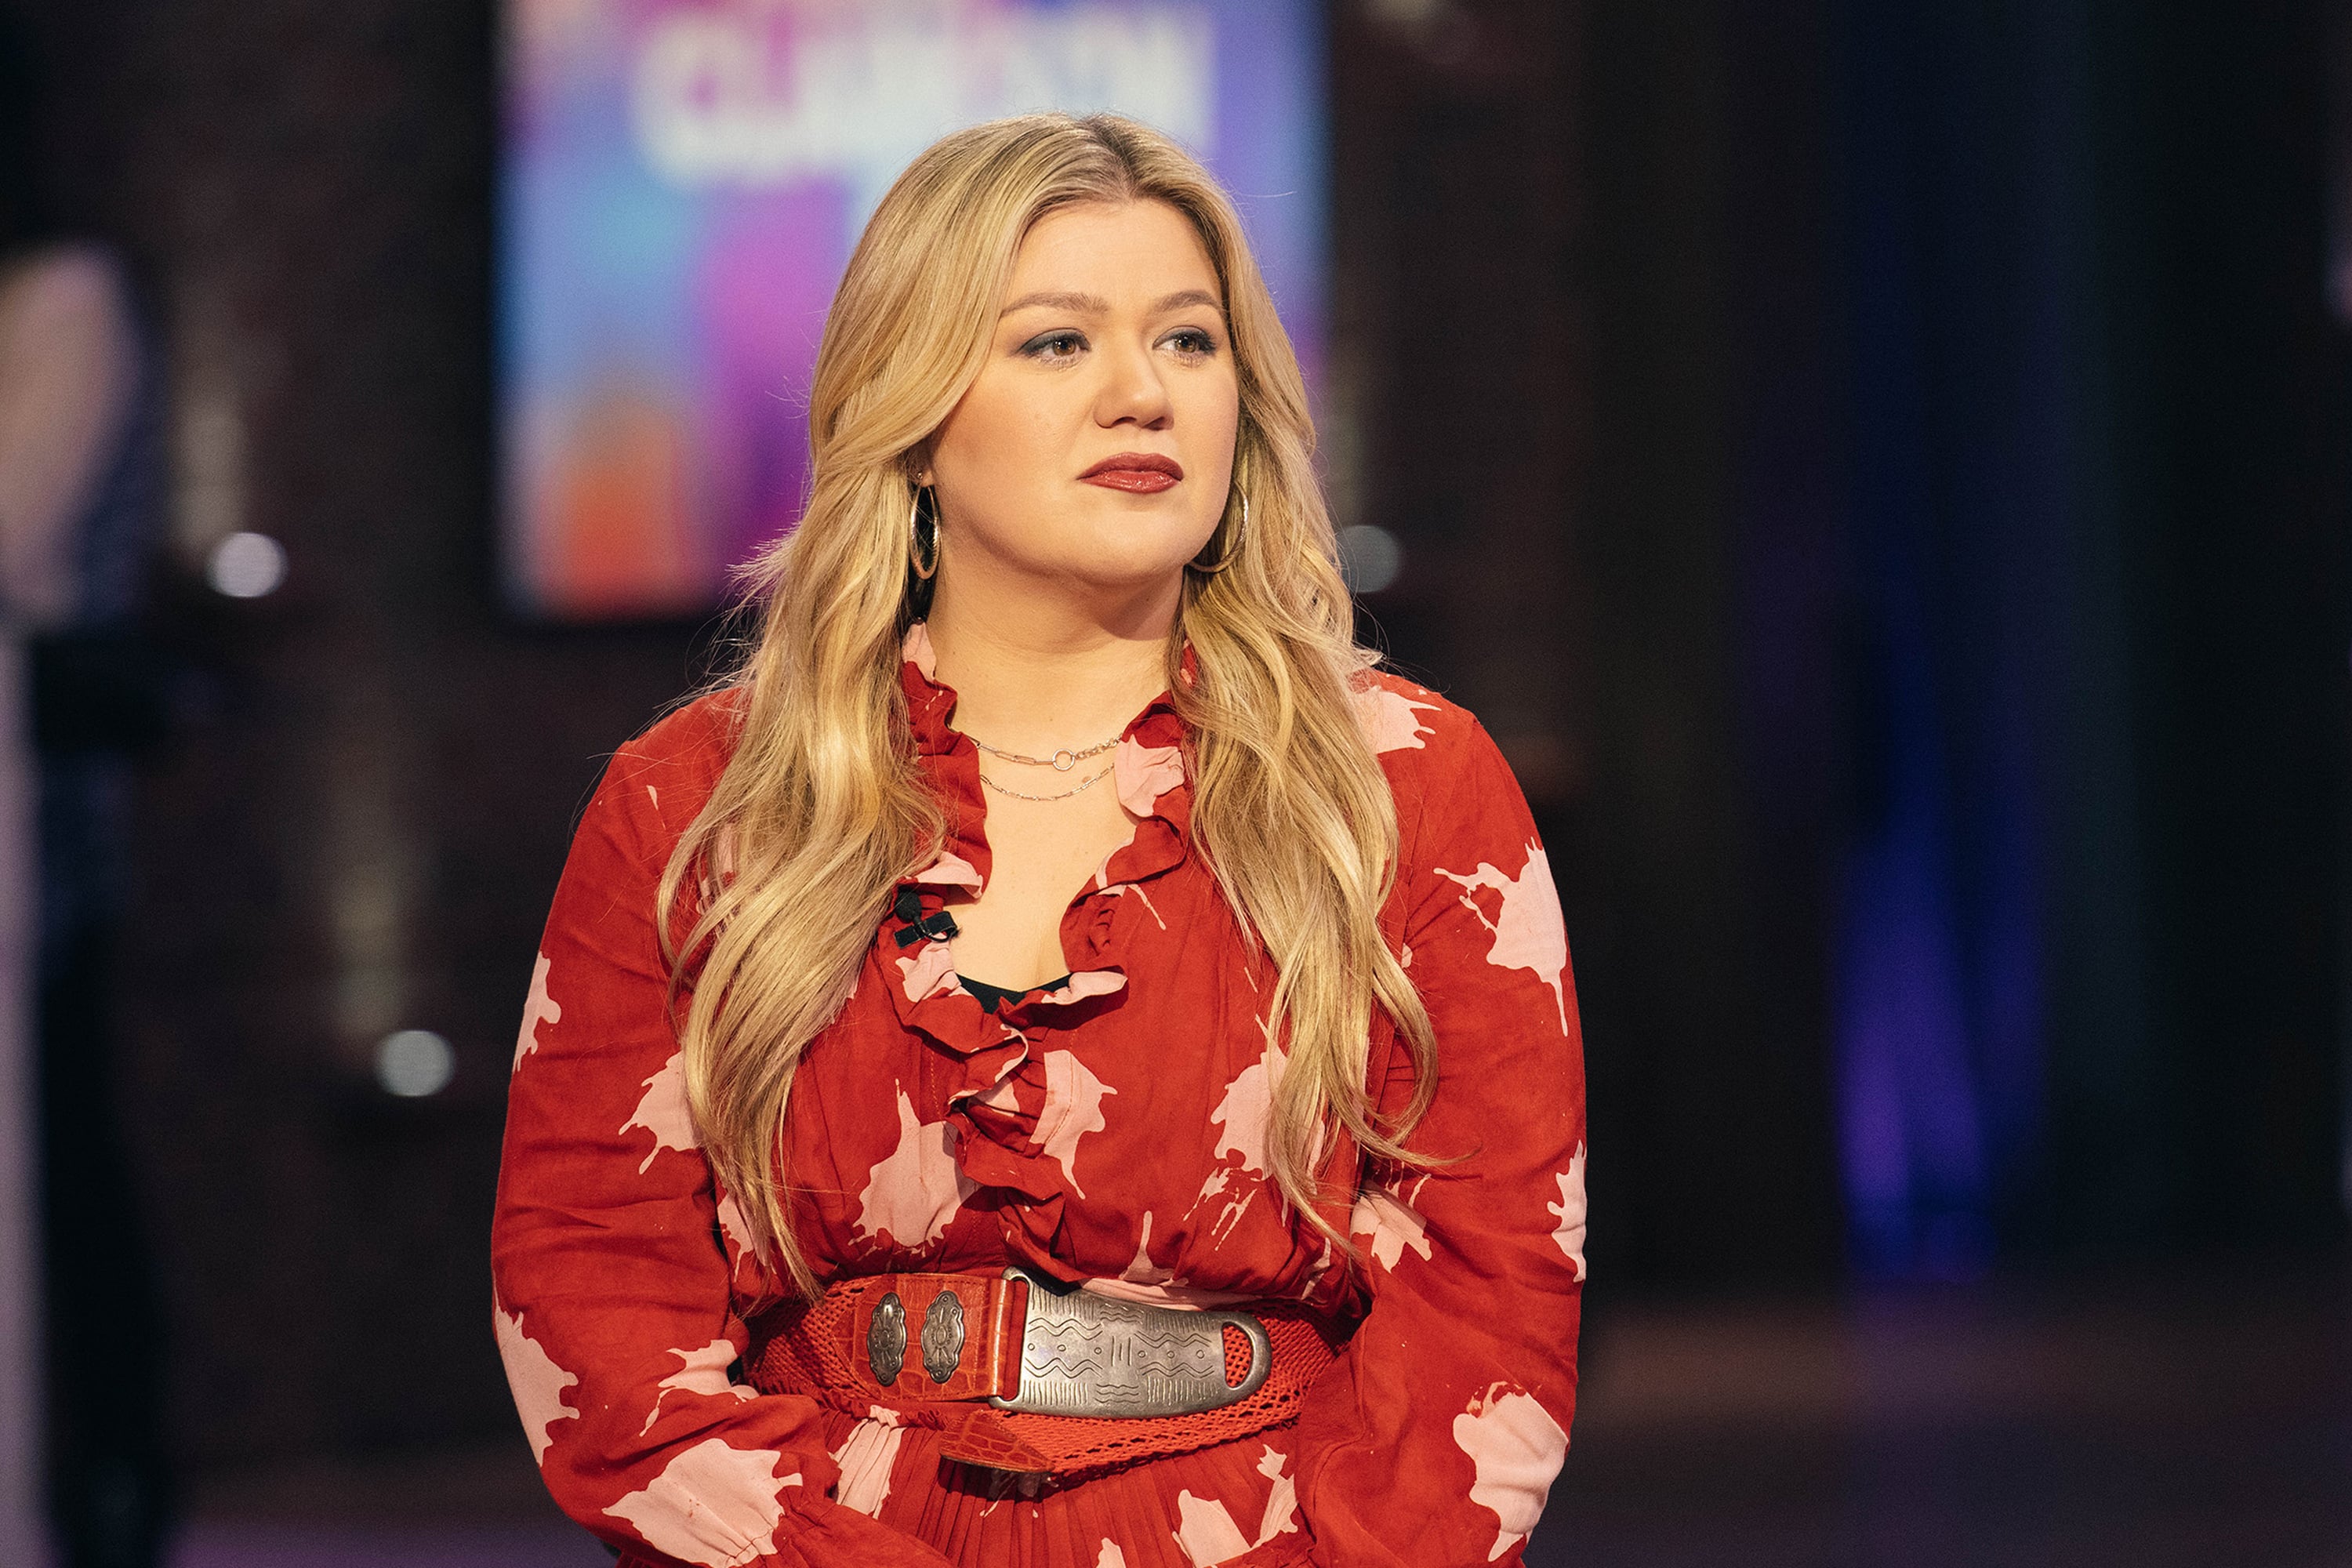 Kelly Clarkson Says She “Wouldn’t Have Made it” Without Antidepressants During Divorce